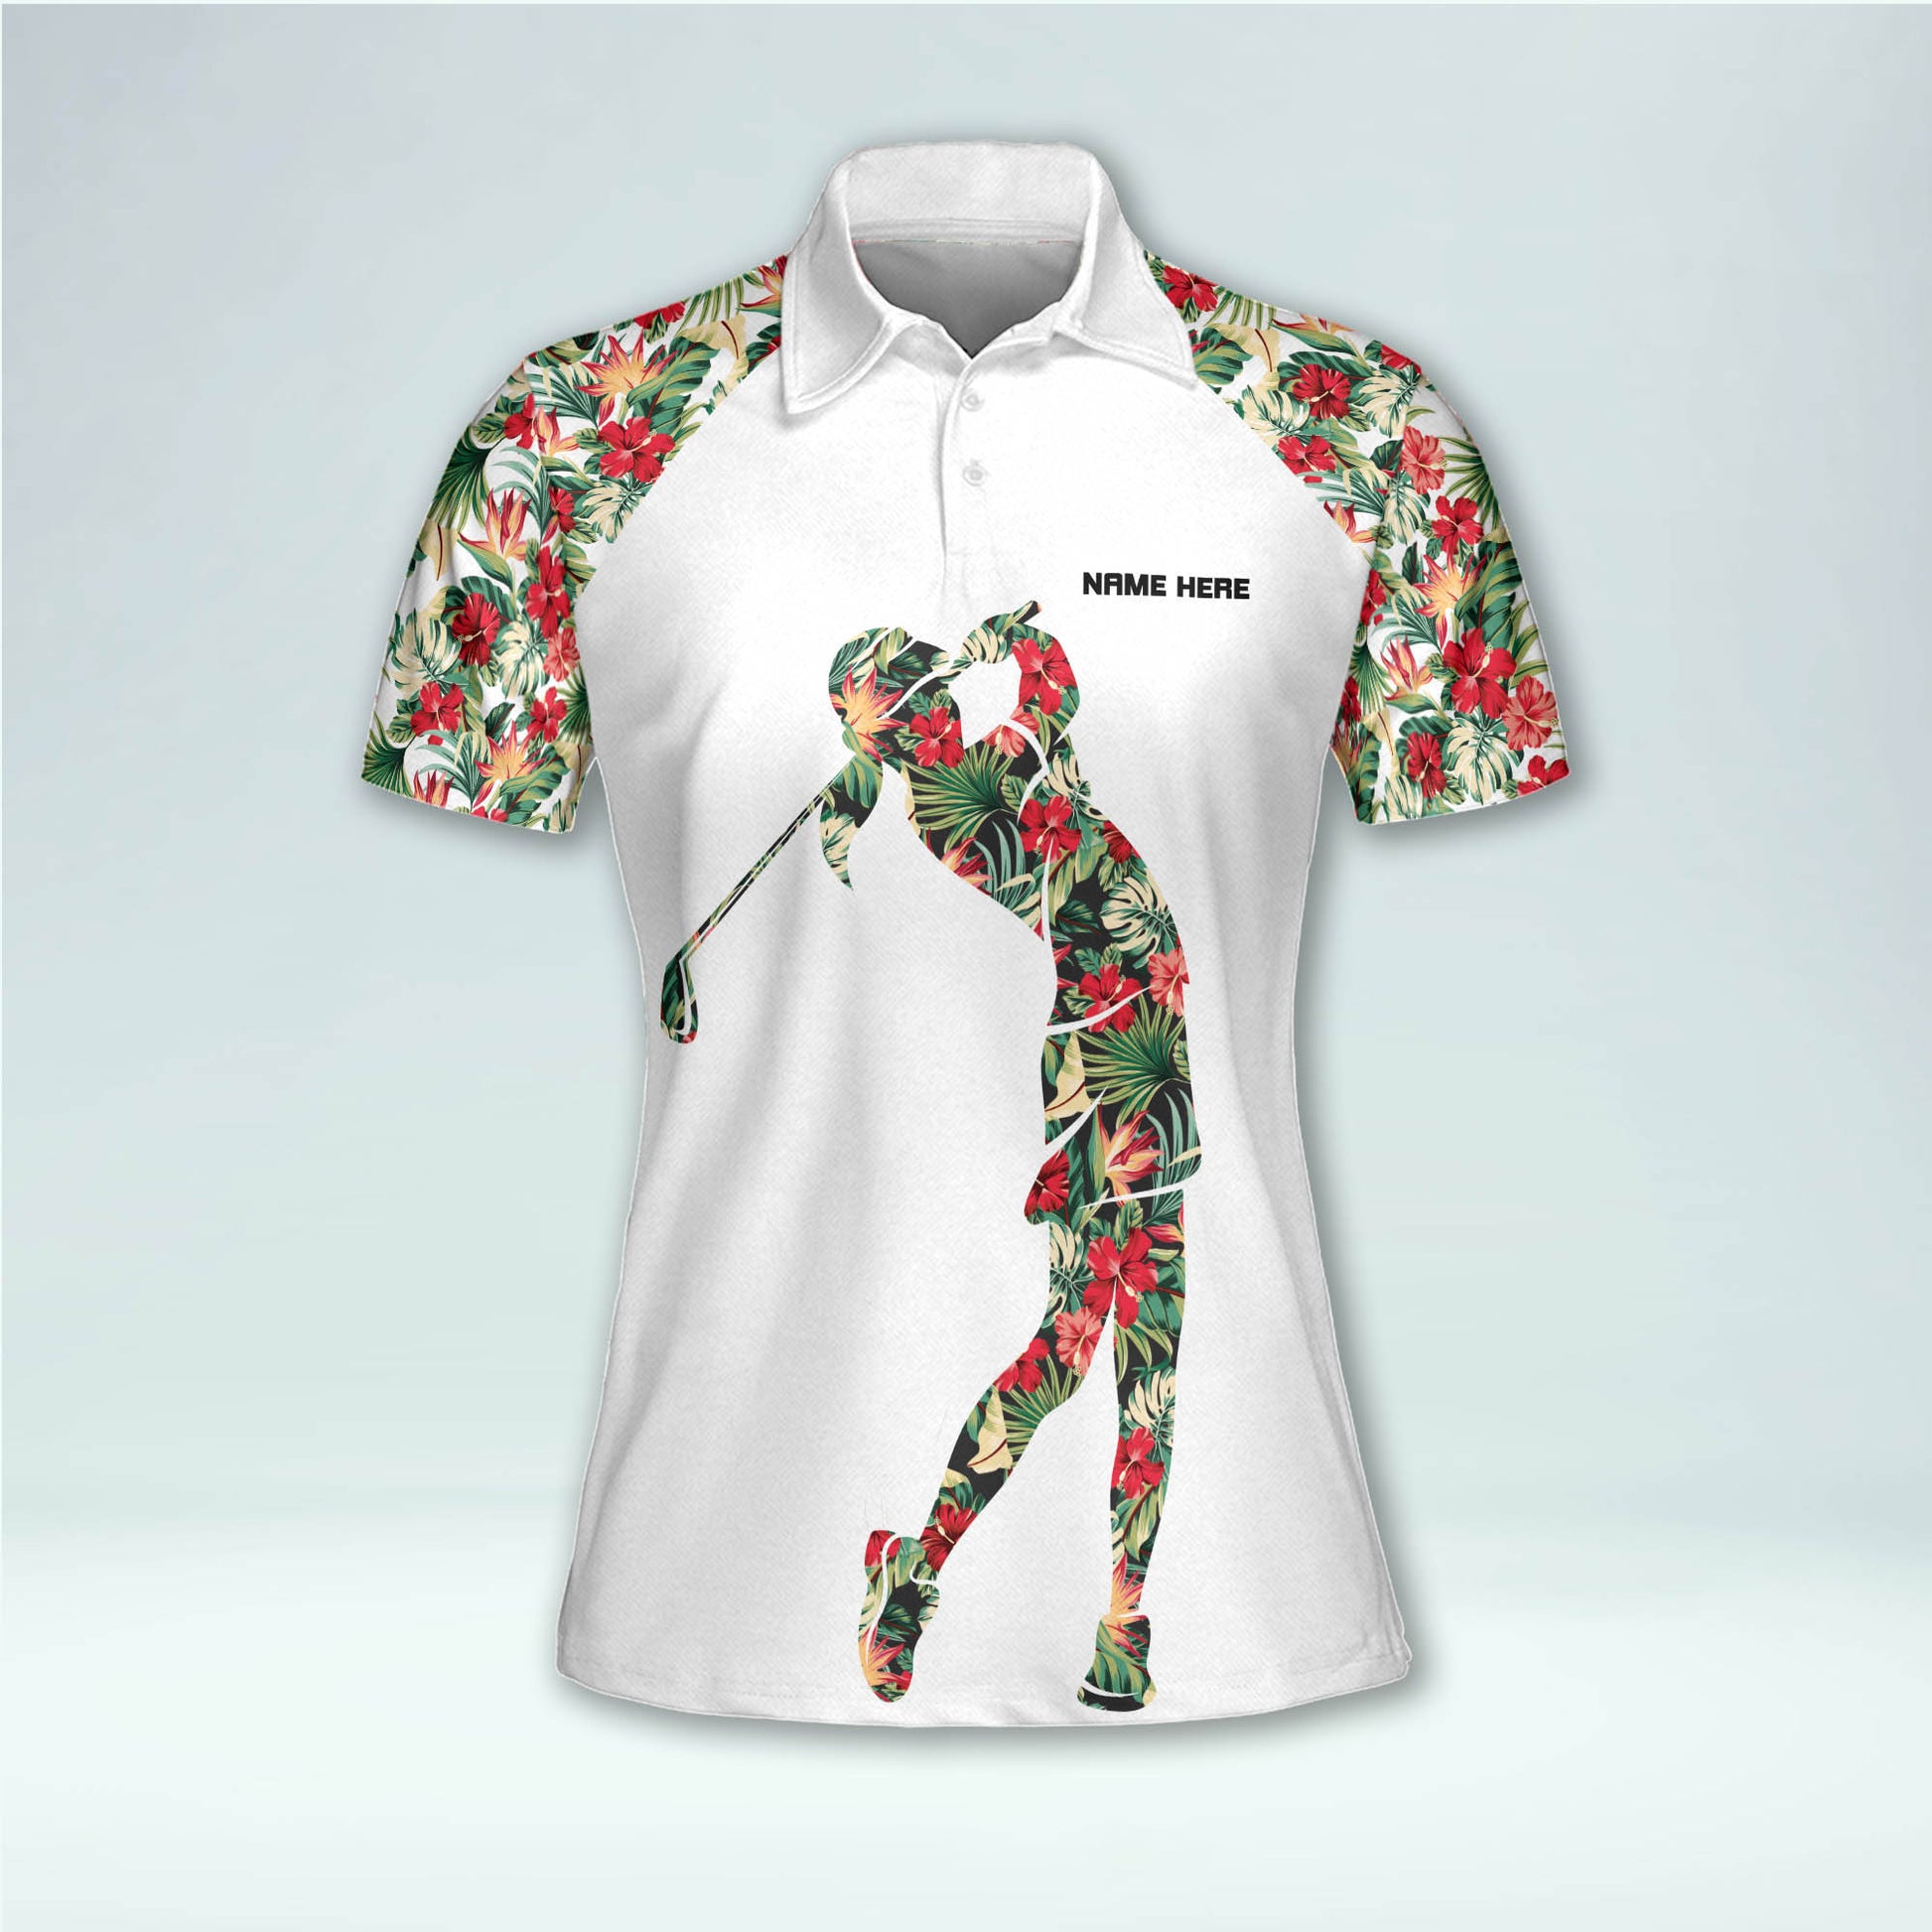 Stay Ahead of the Game: Wholesale Golf Apparel for Fashion-Forward Golfers  - Oasis Shirts